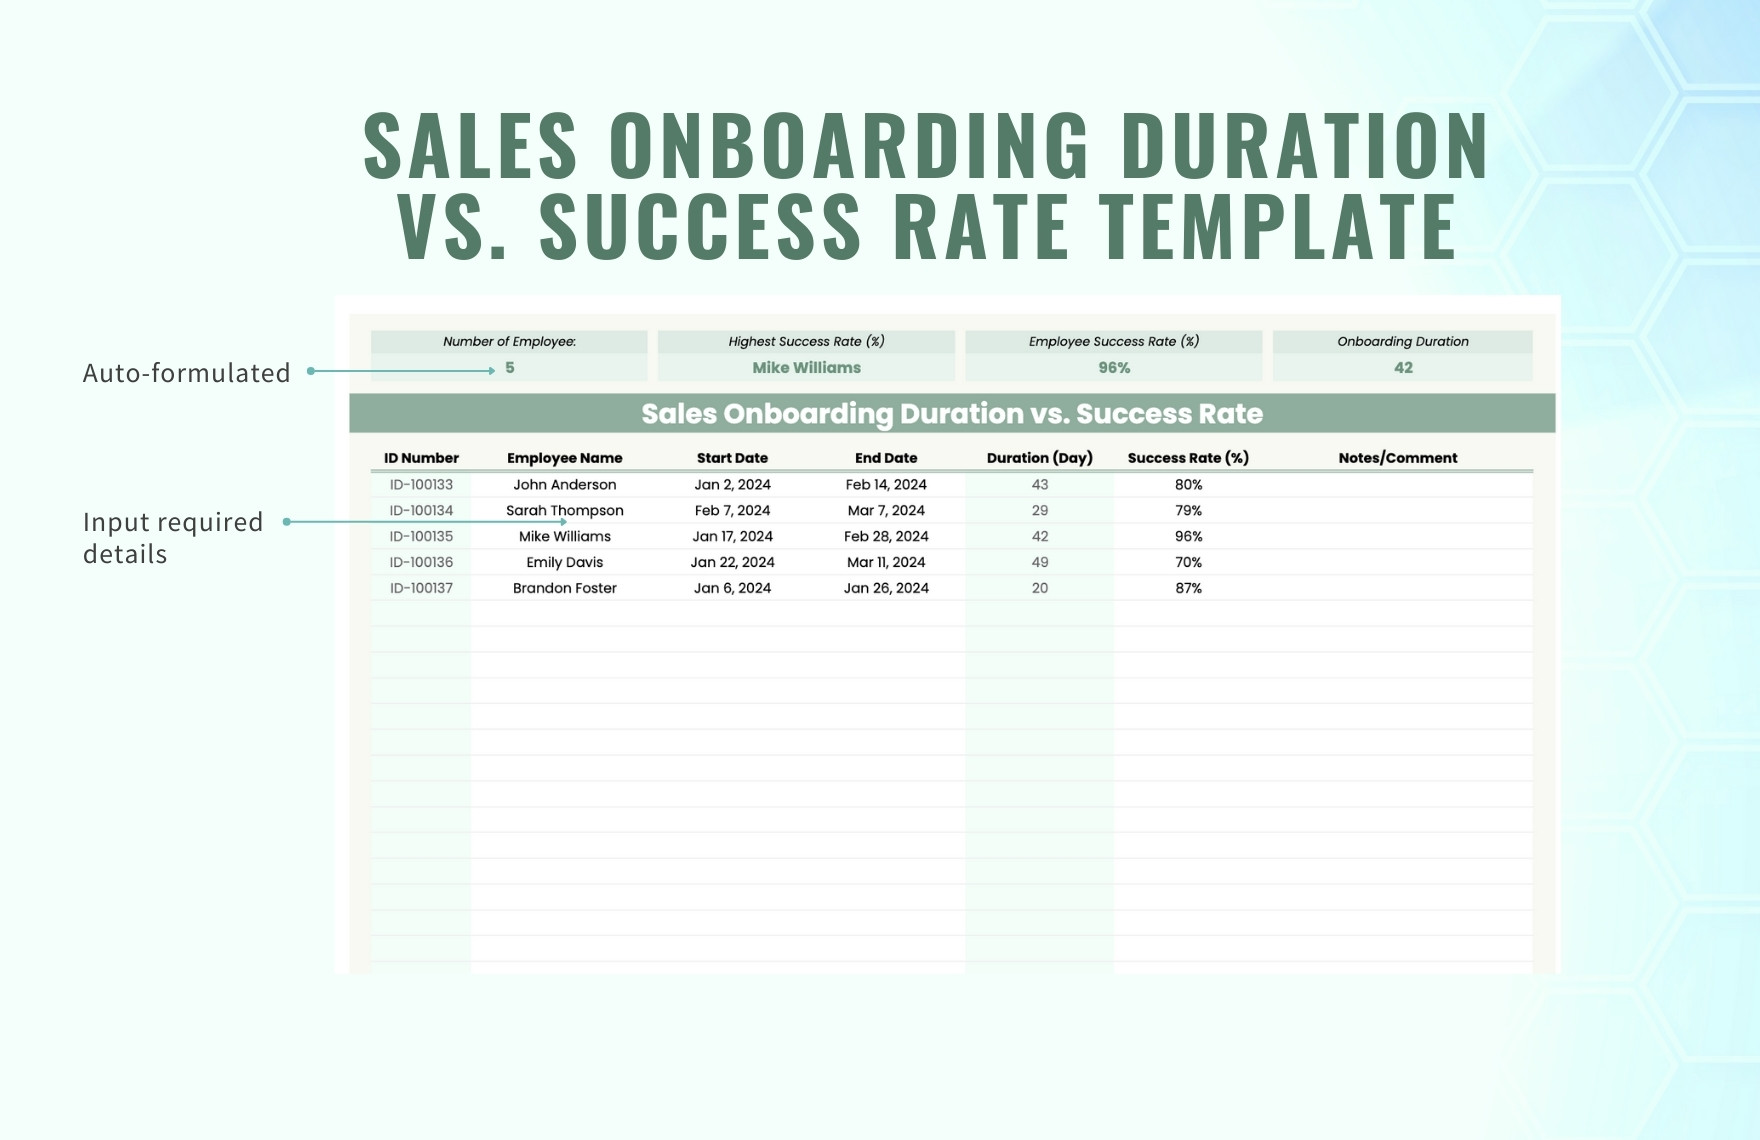 Sales Onboarding Duration vs Success Rate Template